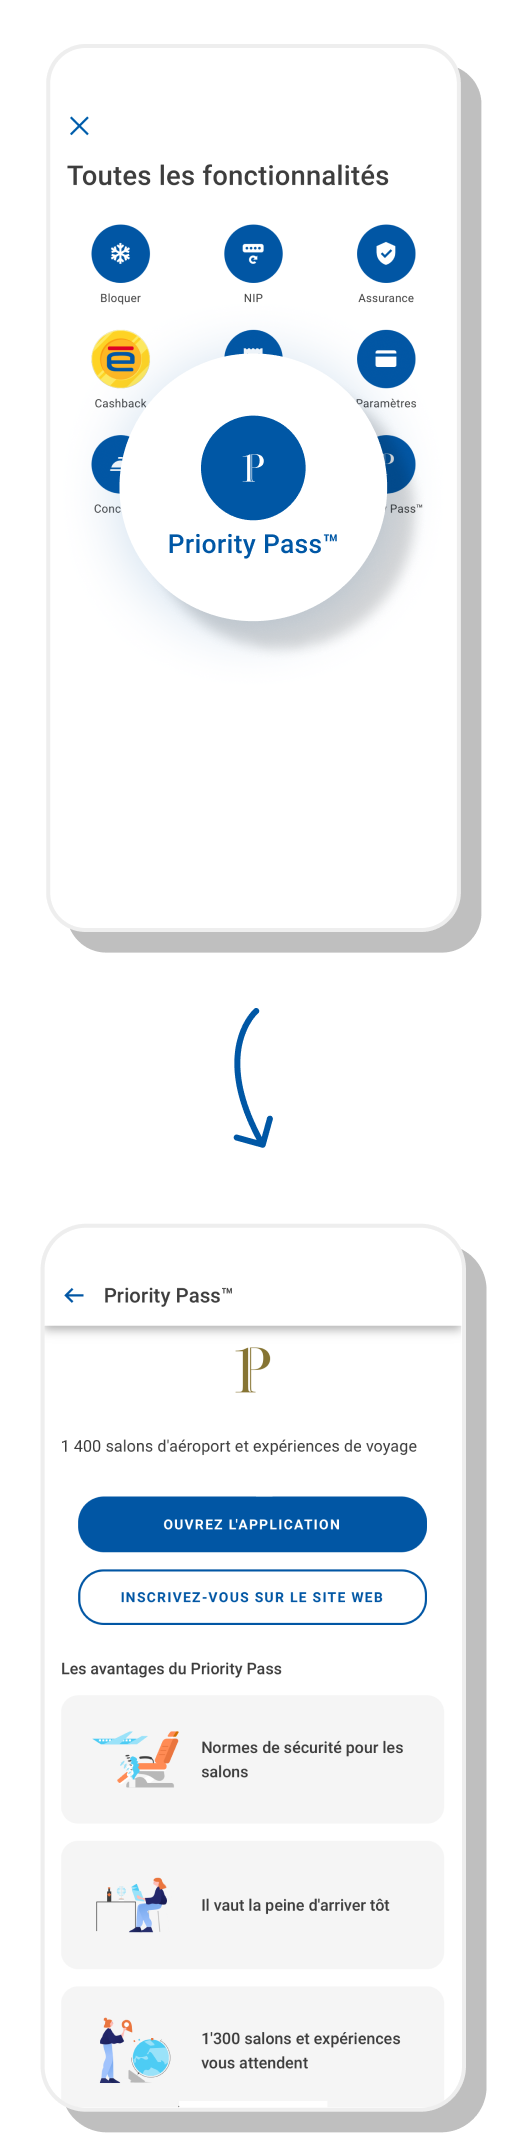 HC-icoapp-mobile-prioritypass-FR.png